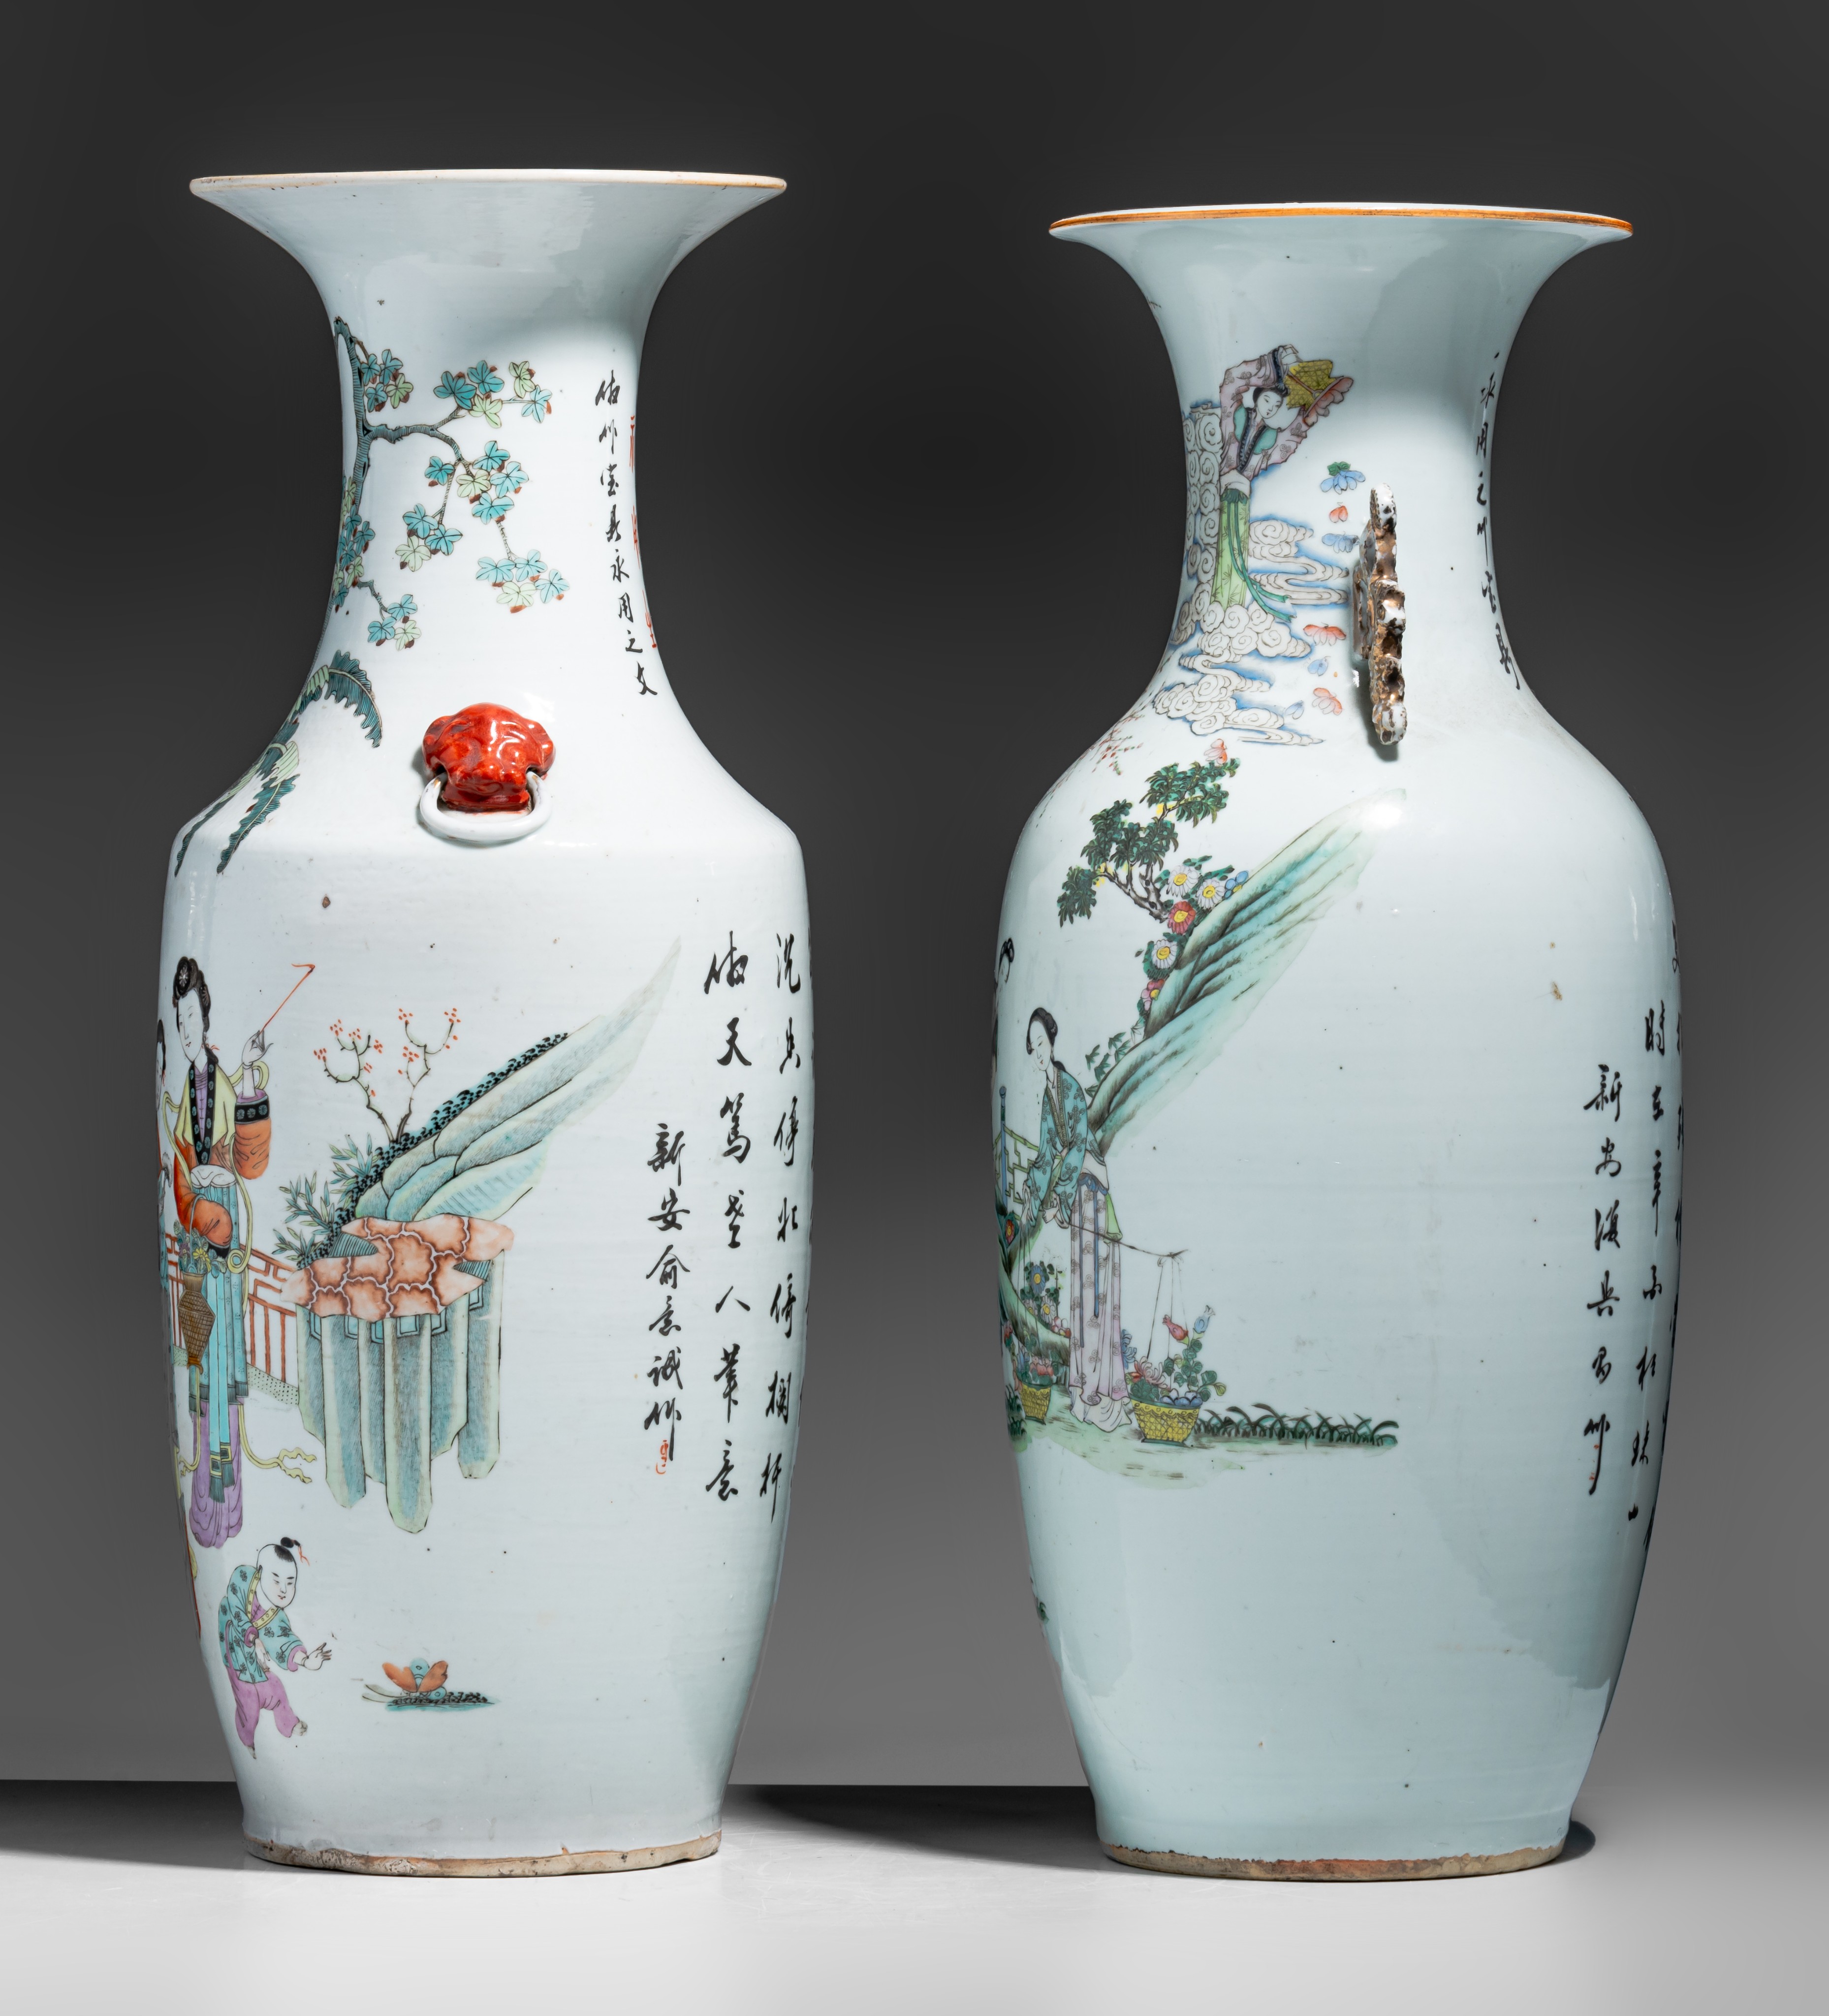 Two Chinese famille rose vases, with a signed text, Republic period, H 58,5 - 60 cm - Image 3 of 7